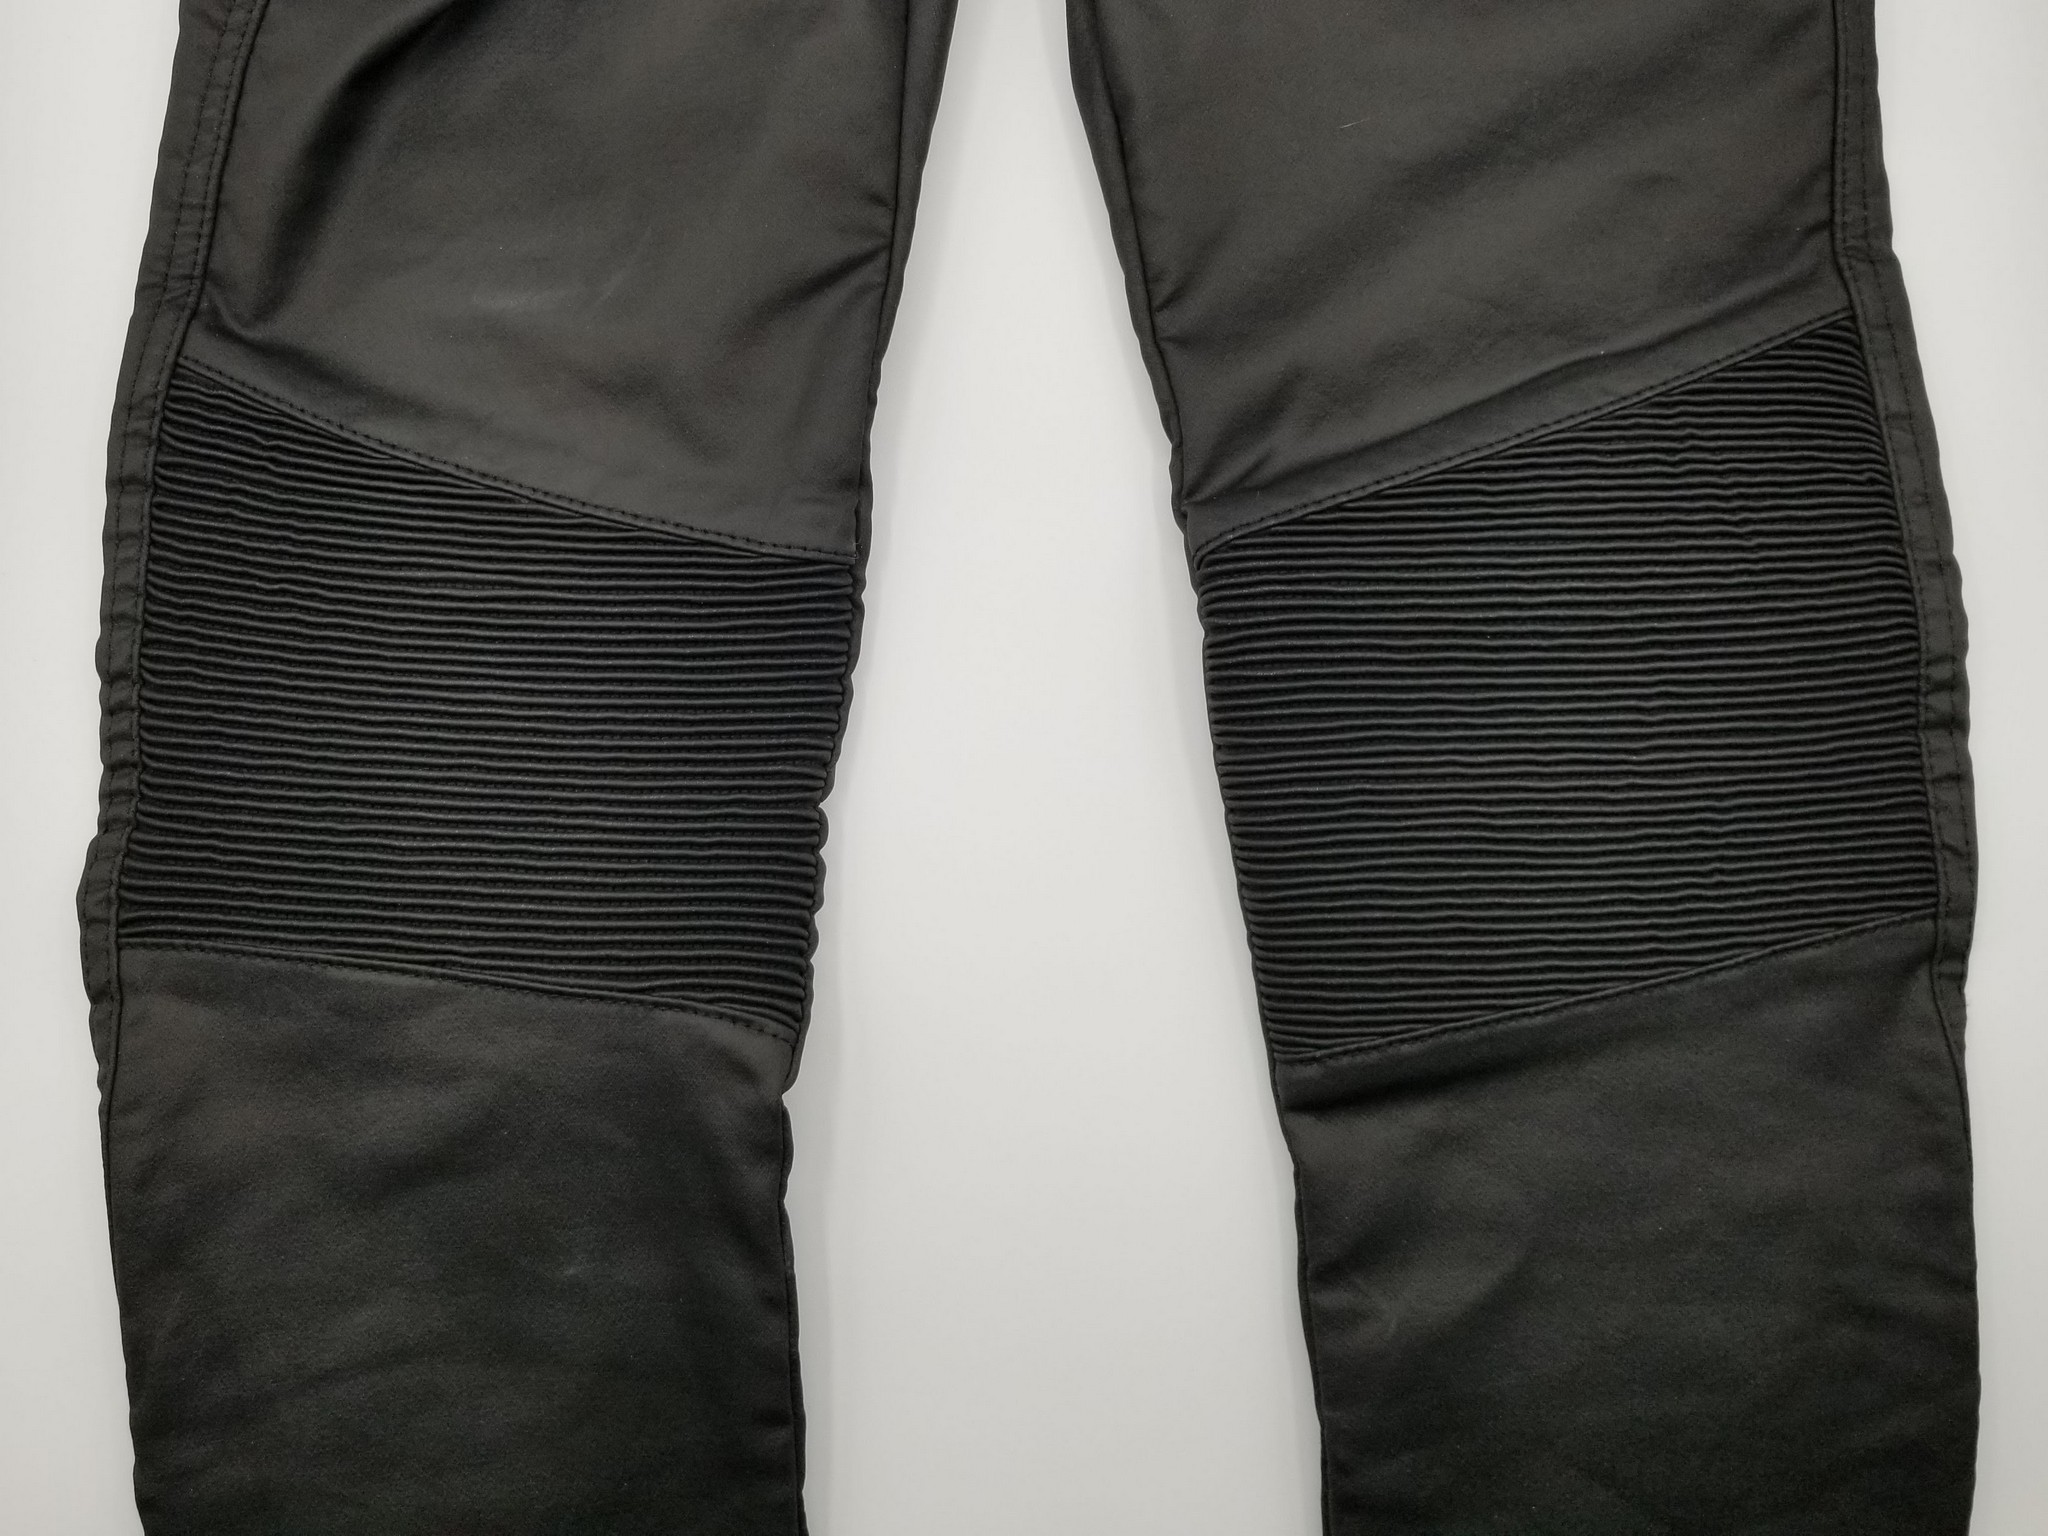 Ribbed stretch panel on Kusari KEV jeans